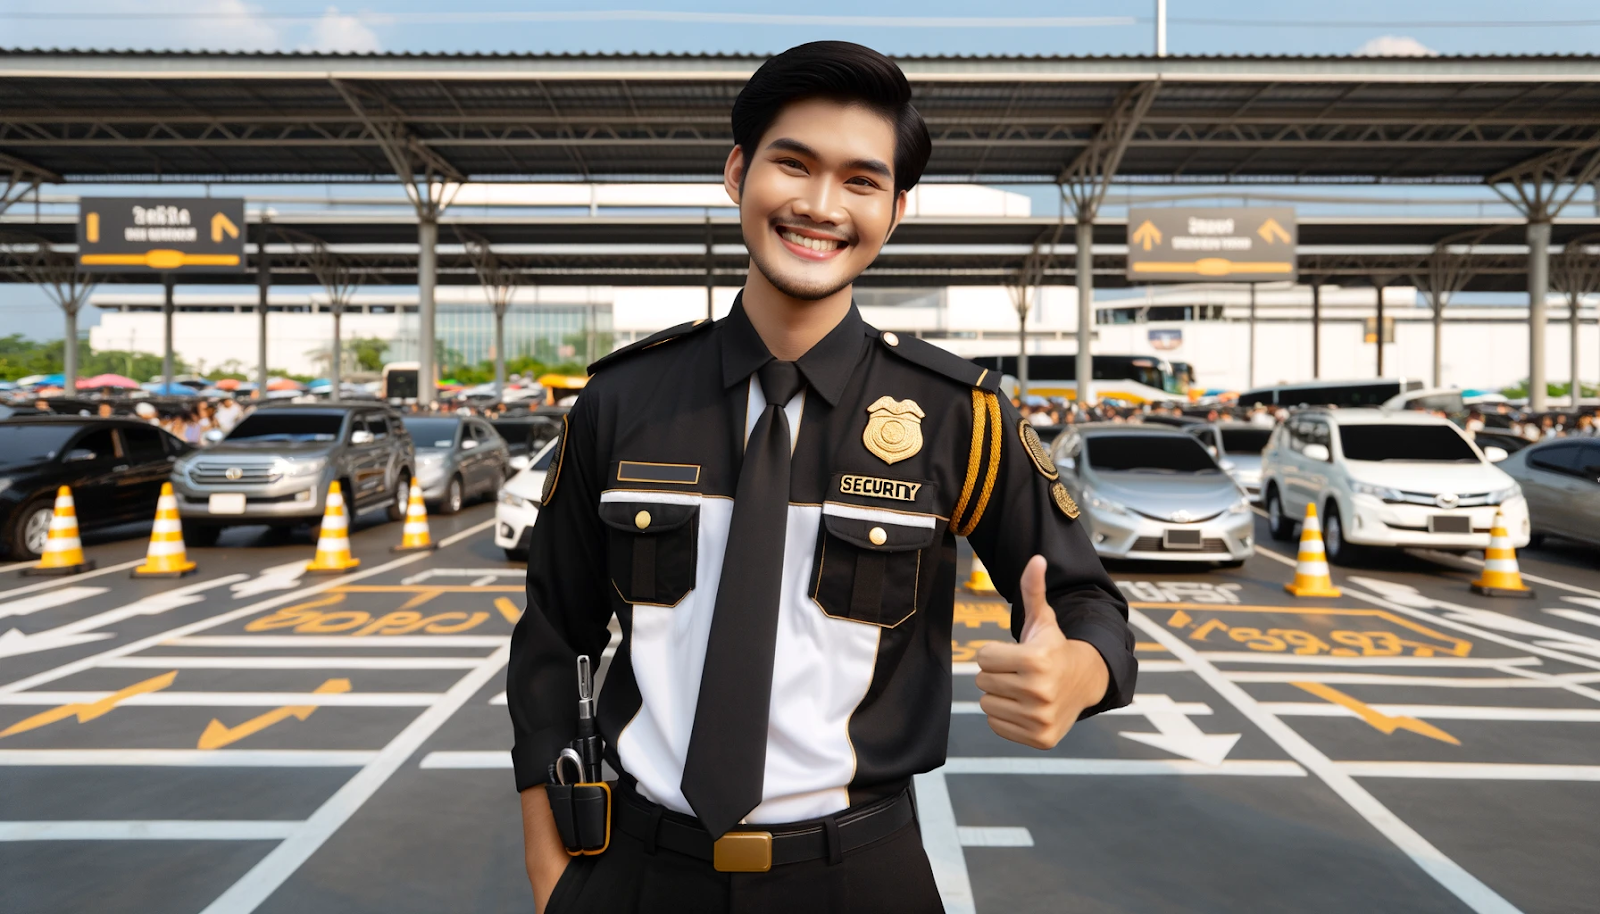 A cheerful security guard in black and gold directs cars in a parking lot, ensuring event safety with organized lanes, smiling guidance, and clear signage.